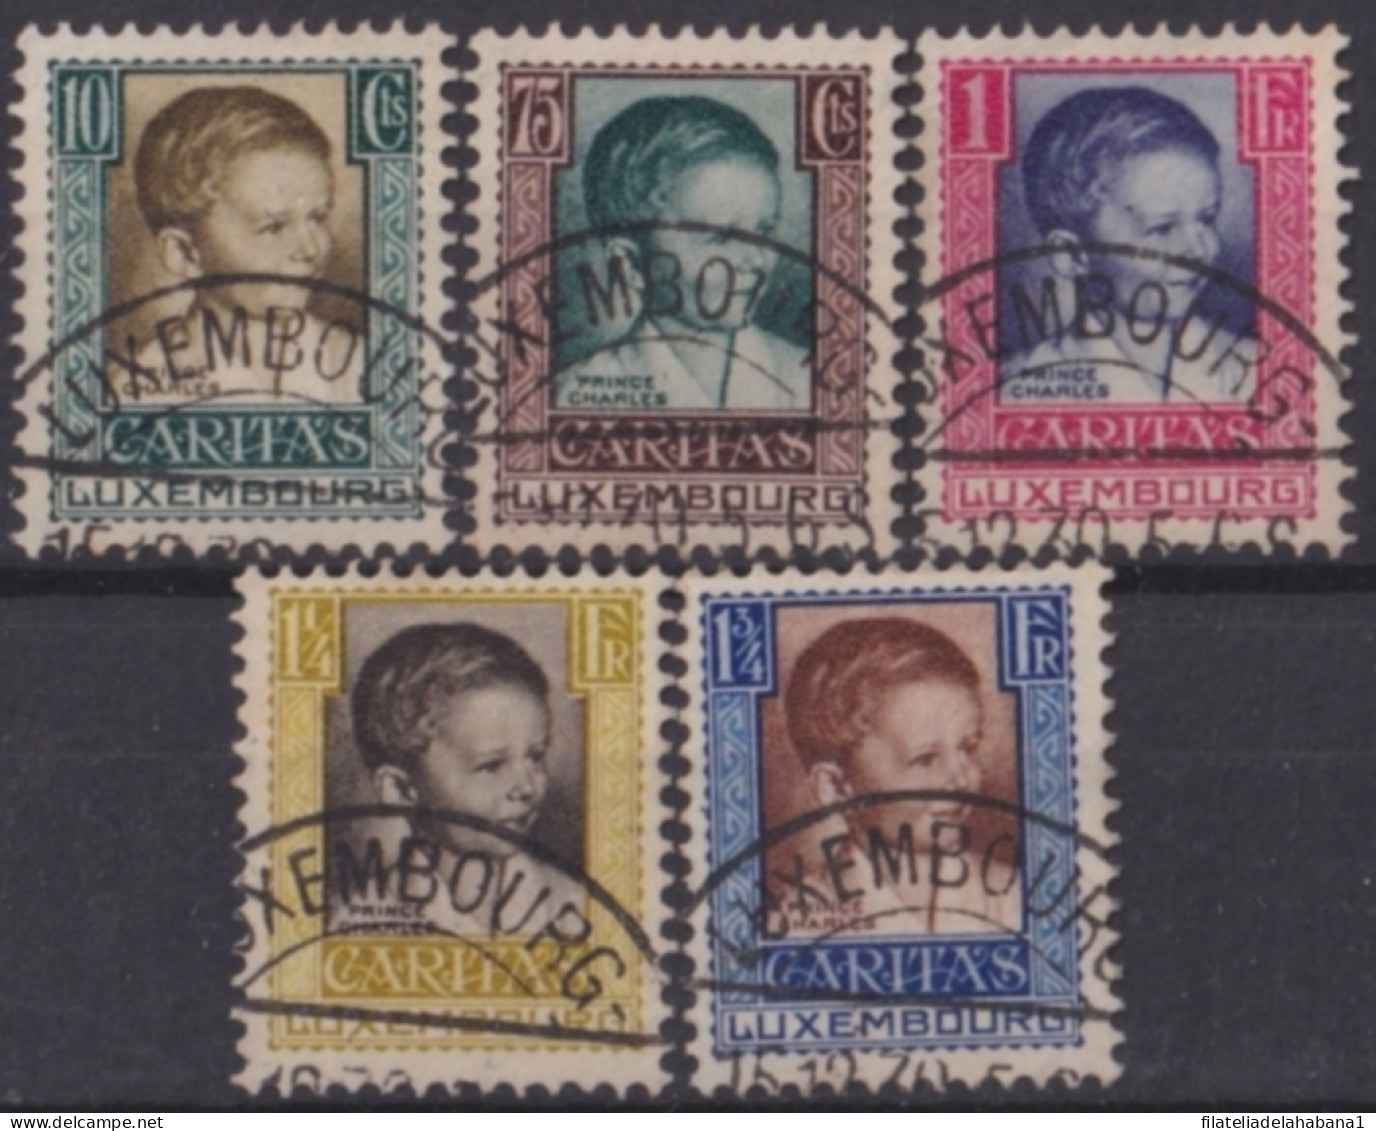 F-EX48514 LUXEMBOURG 1930 CHILD WELFARE CHILD SEMIPOSTAL USED + 50€.  - Usados